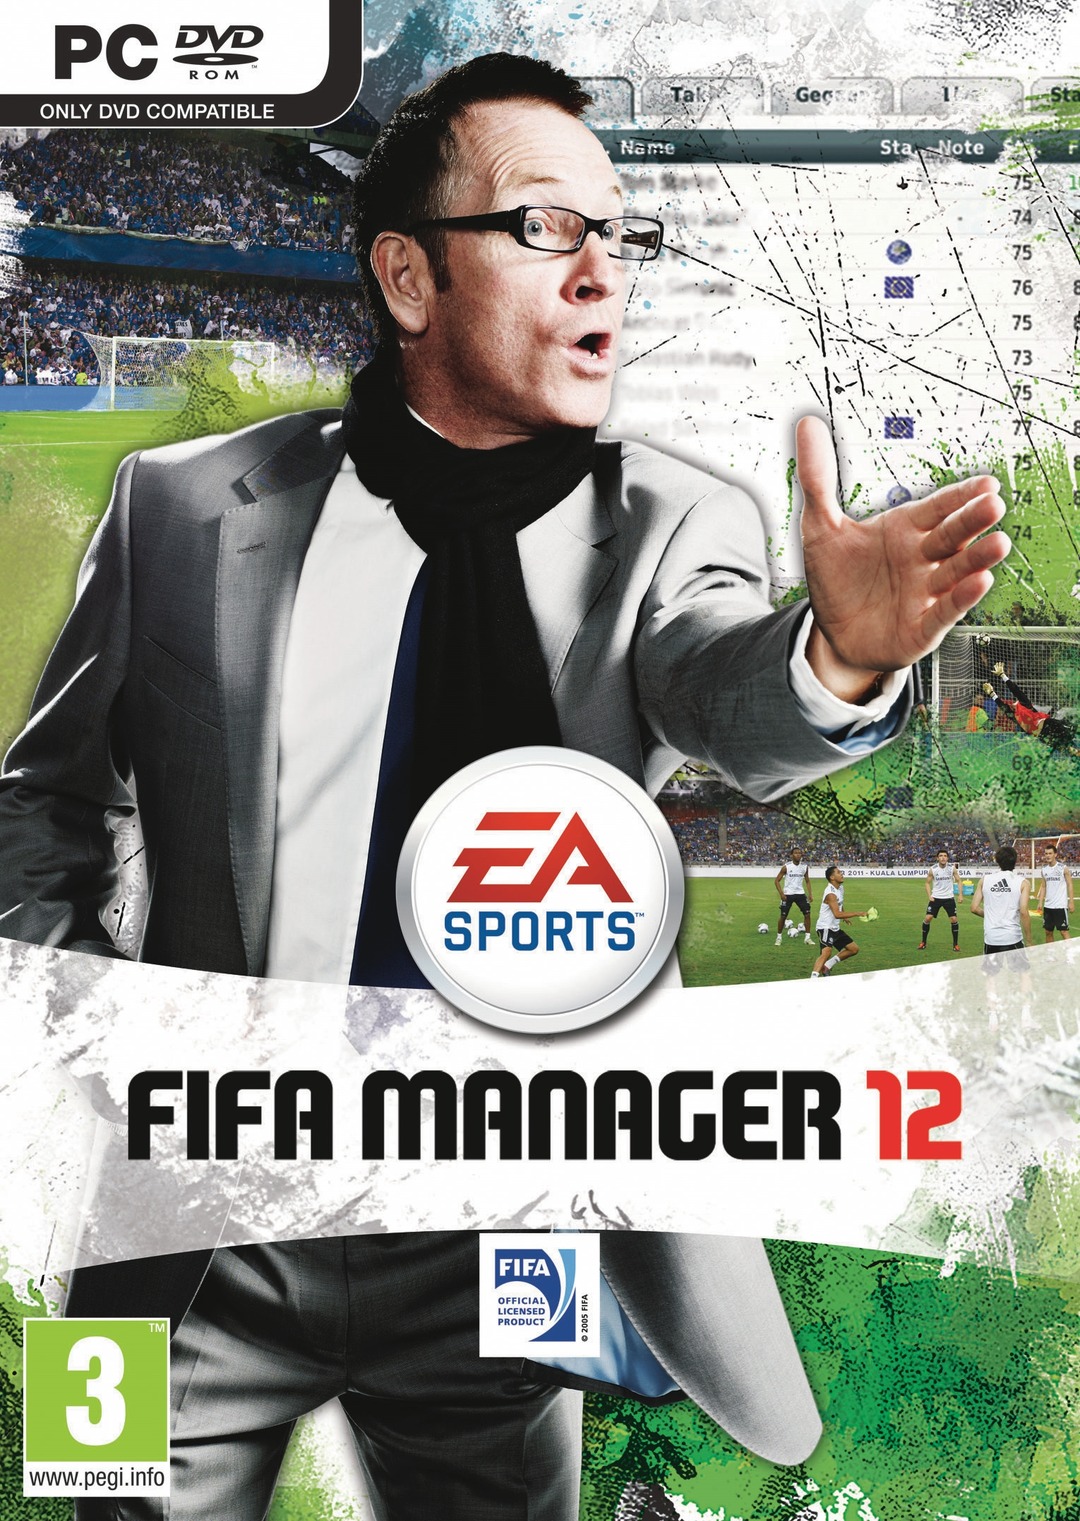 fifa manager 11 activation exe